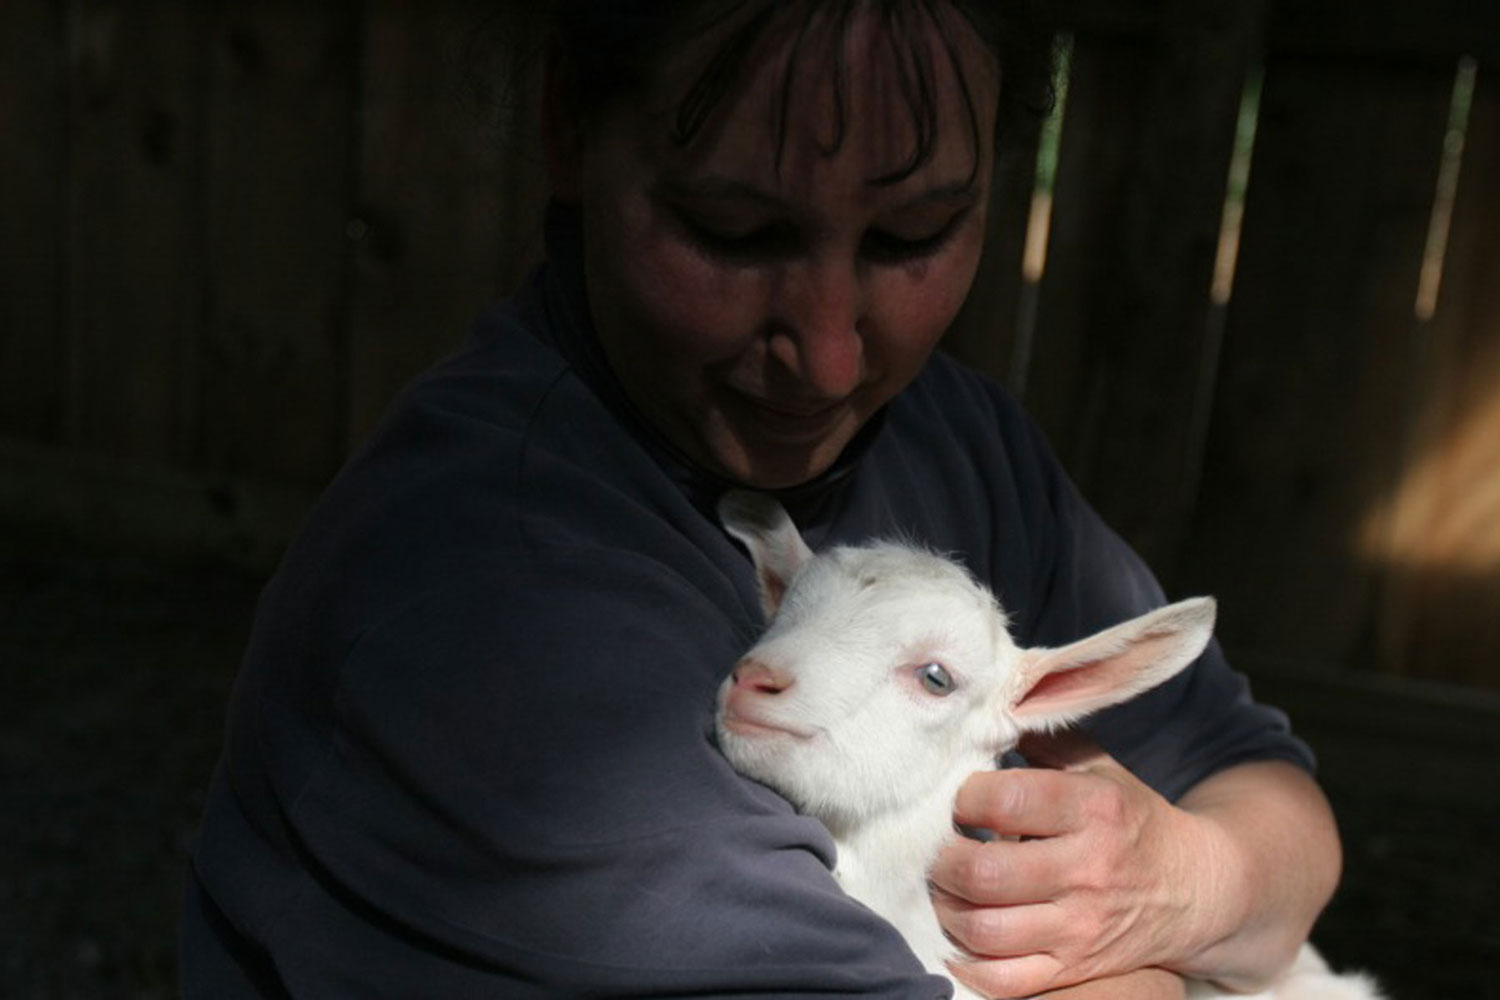 A baby lamb sits in the arms of a woman who looks tenderly at it